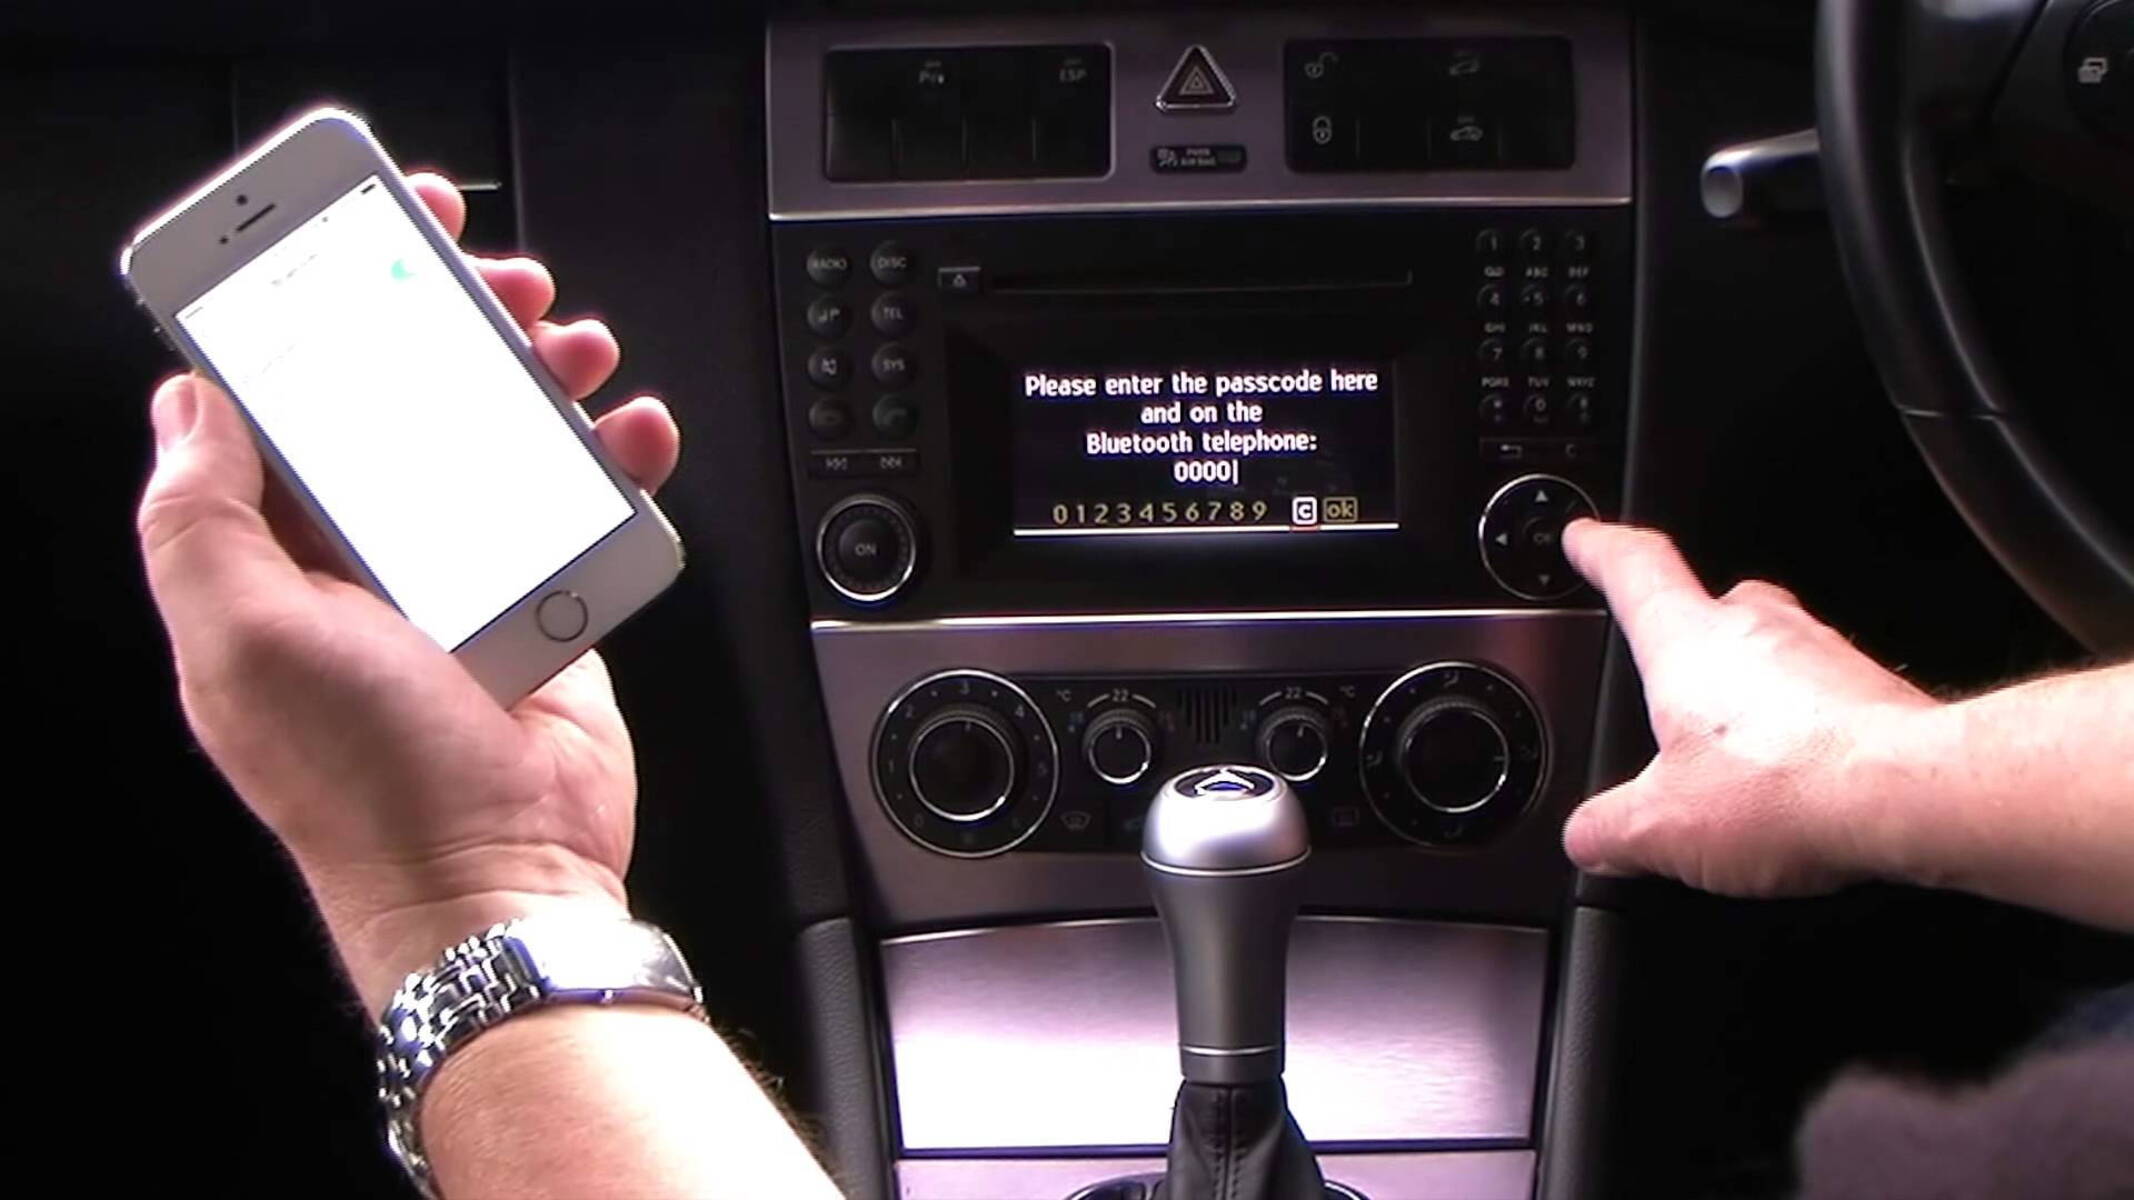 Mercedes-Benz Connectivity: Connecting IPhone To Mercedes Bluetooth